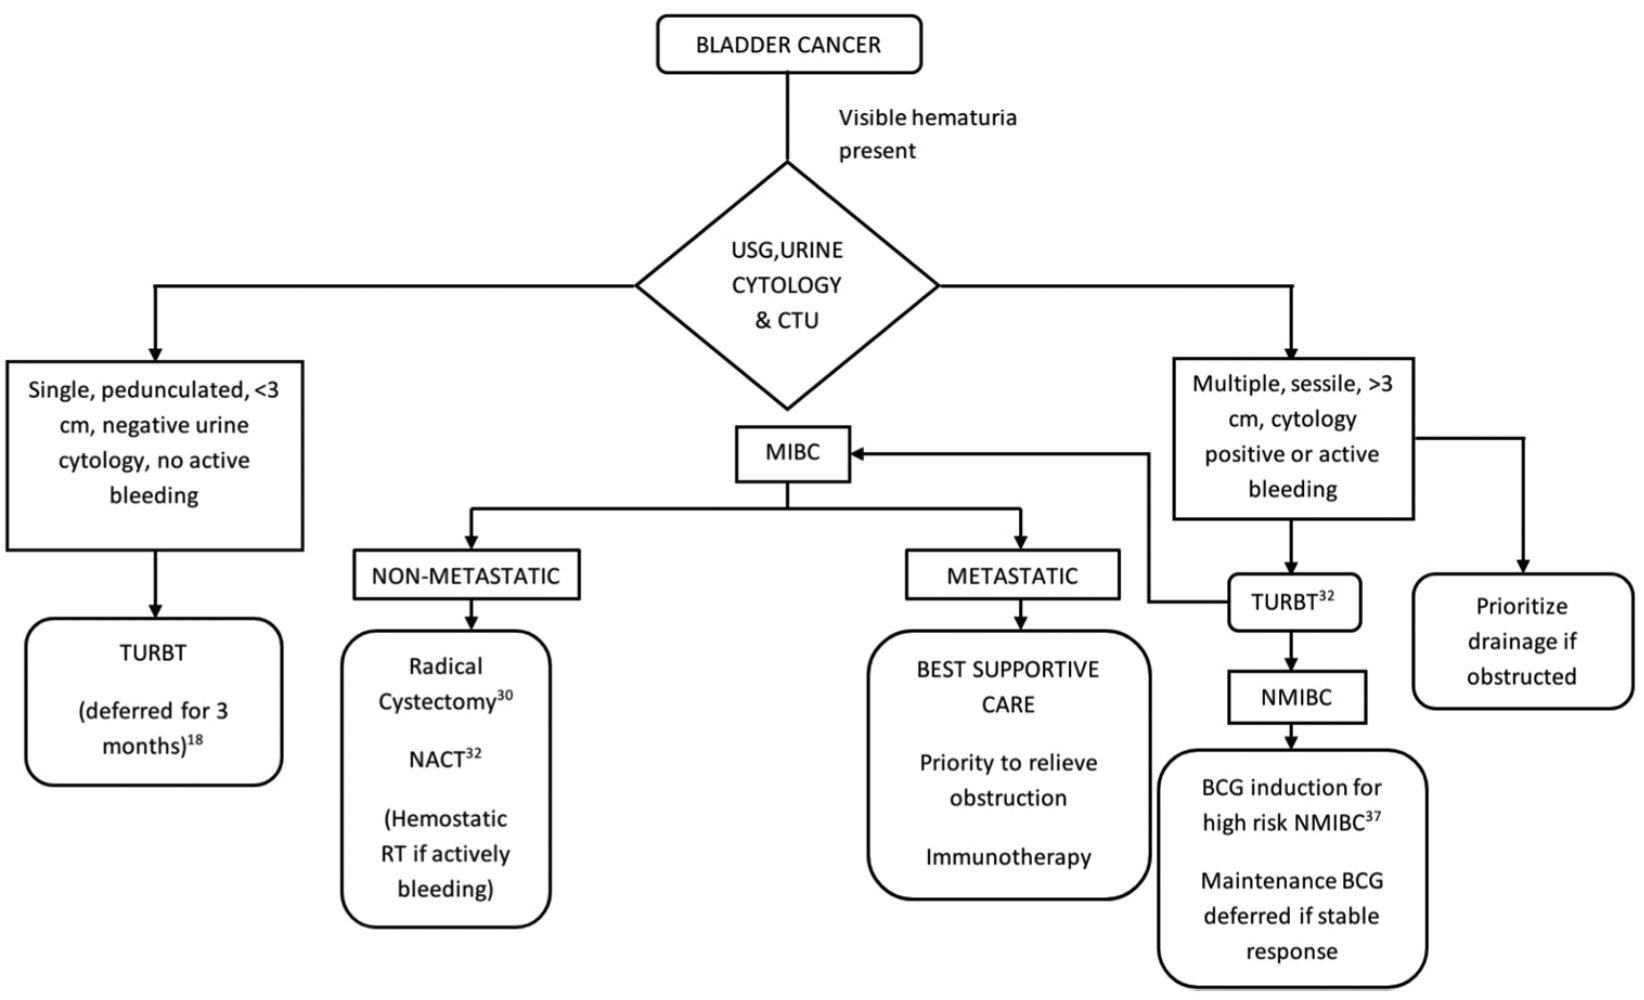 Algorithm for management of renal cell carcinoma in the COVID 19 pandemic 2